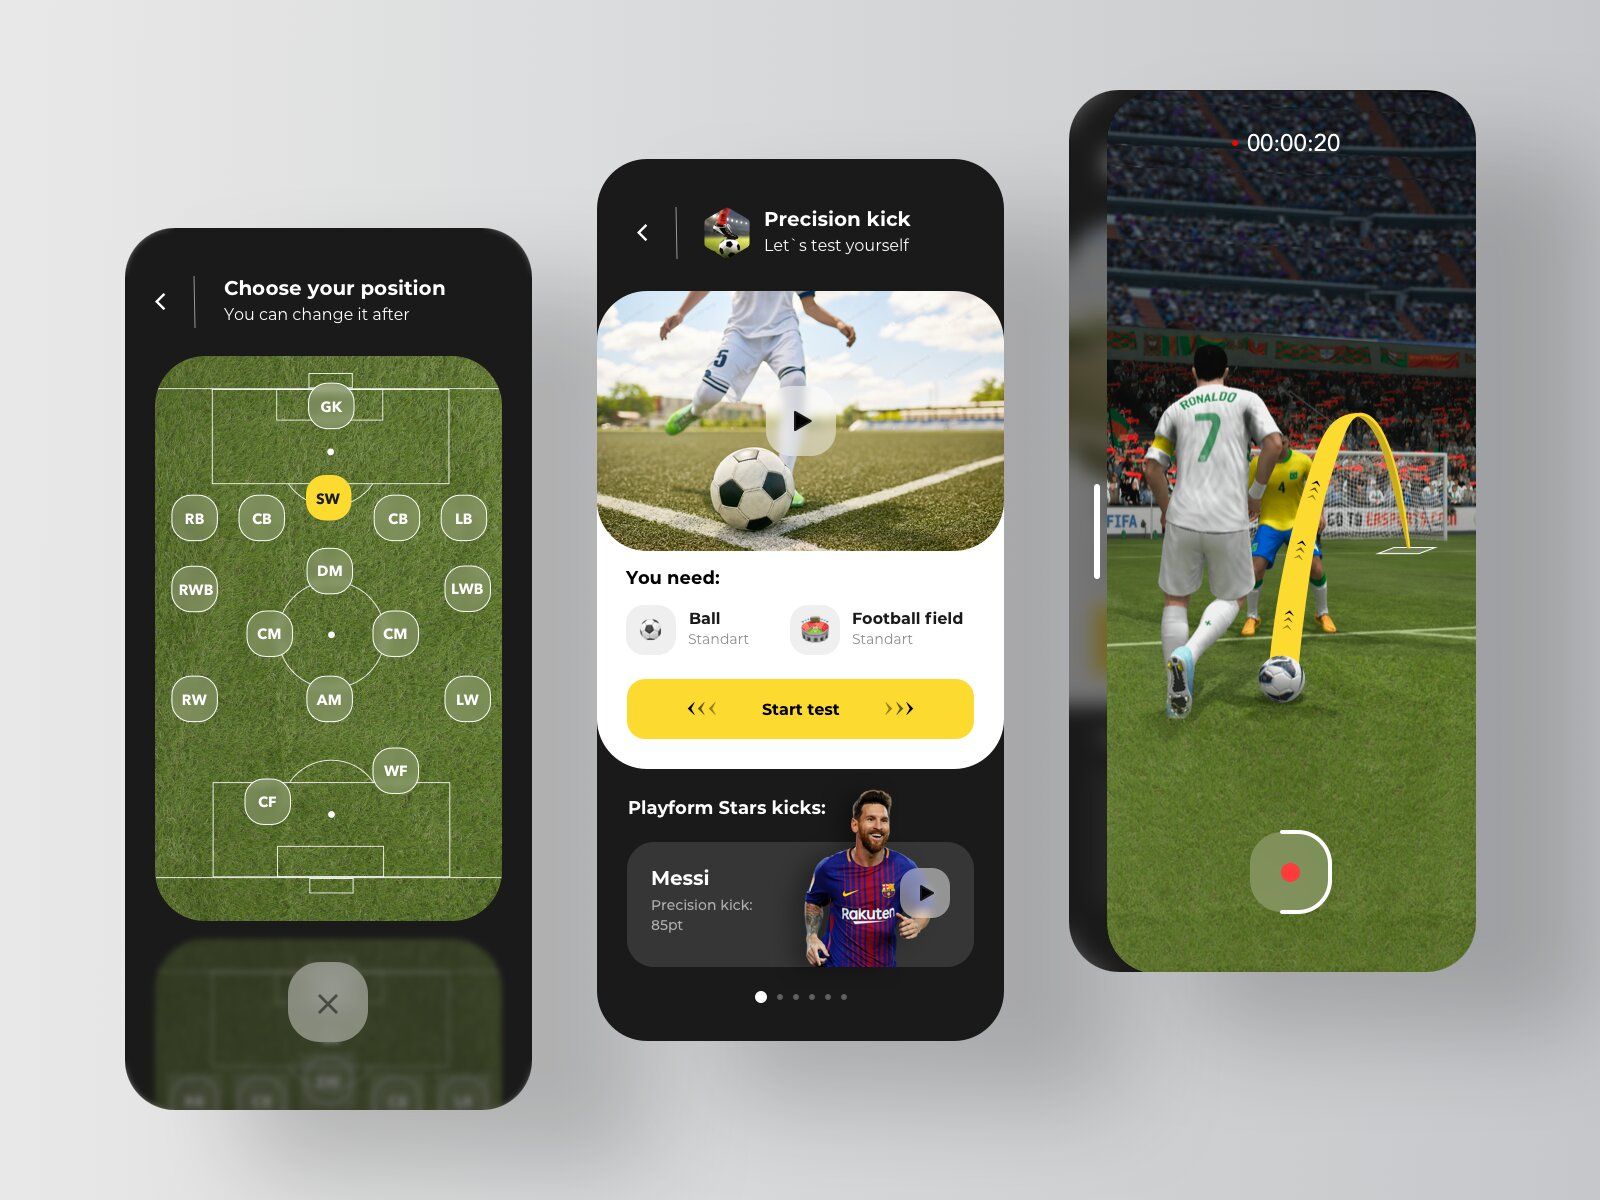 VR technologies can be used in different fields of eLearning platforms (app or website), including sports education (*image by [RD UX/UI](https://dribbble.com/rondesignlabuxui){ rel="nofollow" .default-md}*)